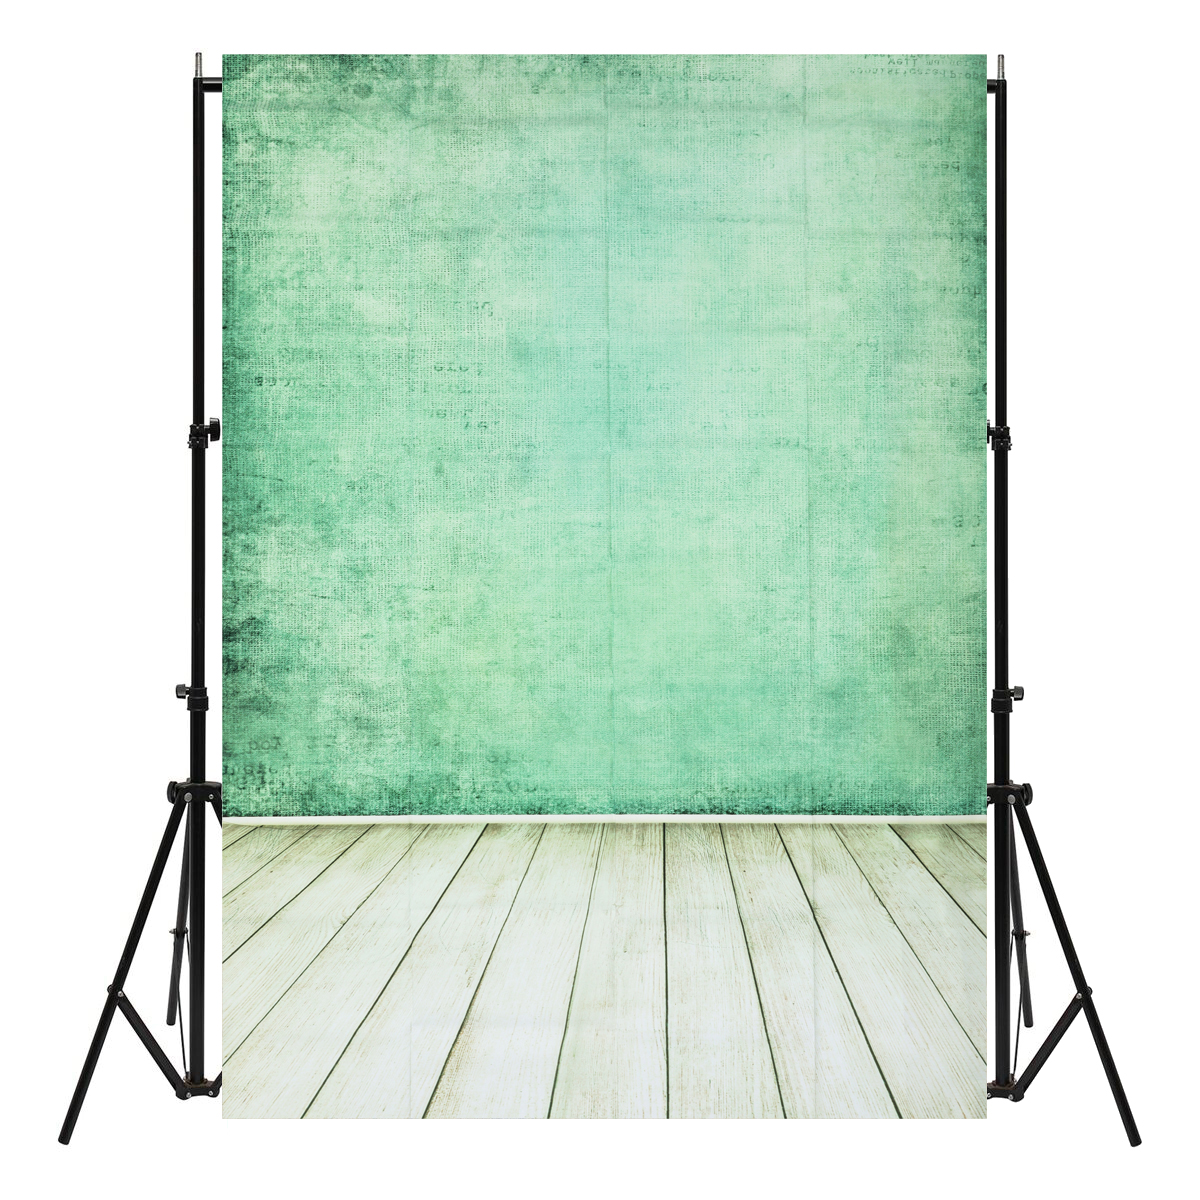 15x21m-Silk-Material-Light-Green-Cement-Wall-Wooden-Pattern-Photo-Background-Cloth-Photography-Backd-1974943-1